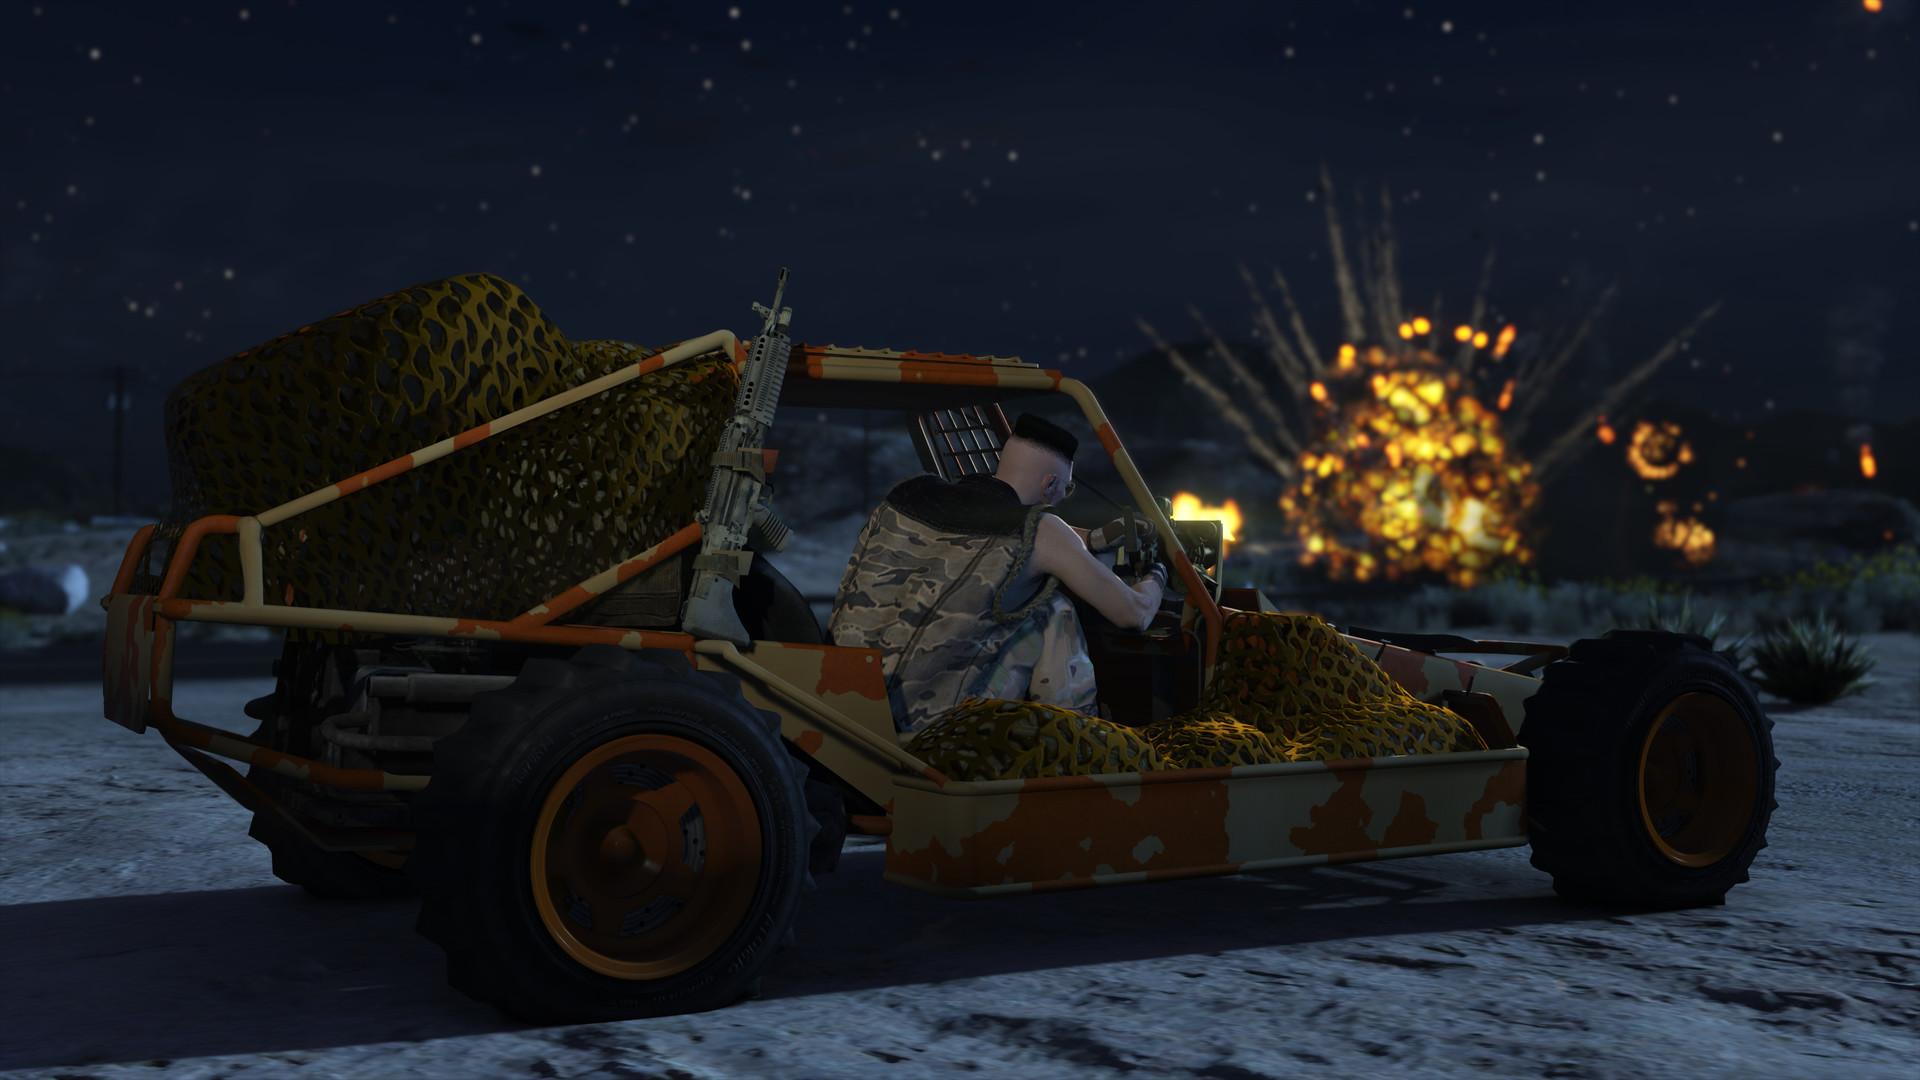 Screenshot №37 from game Grand Theft Auto V